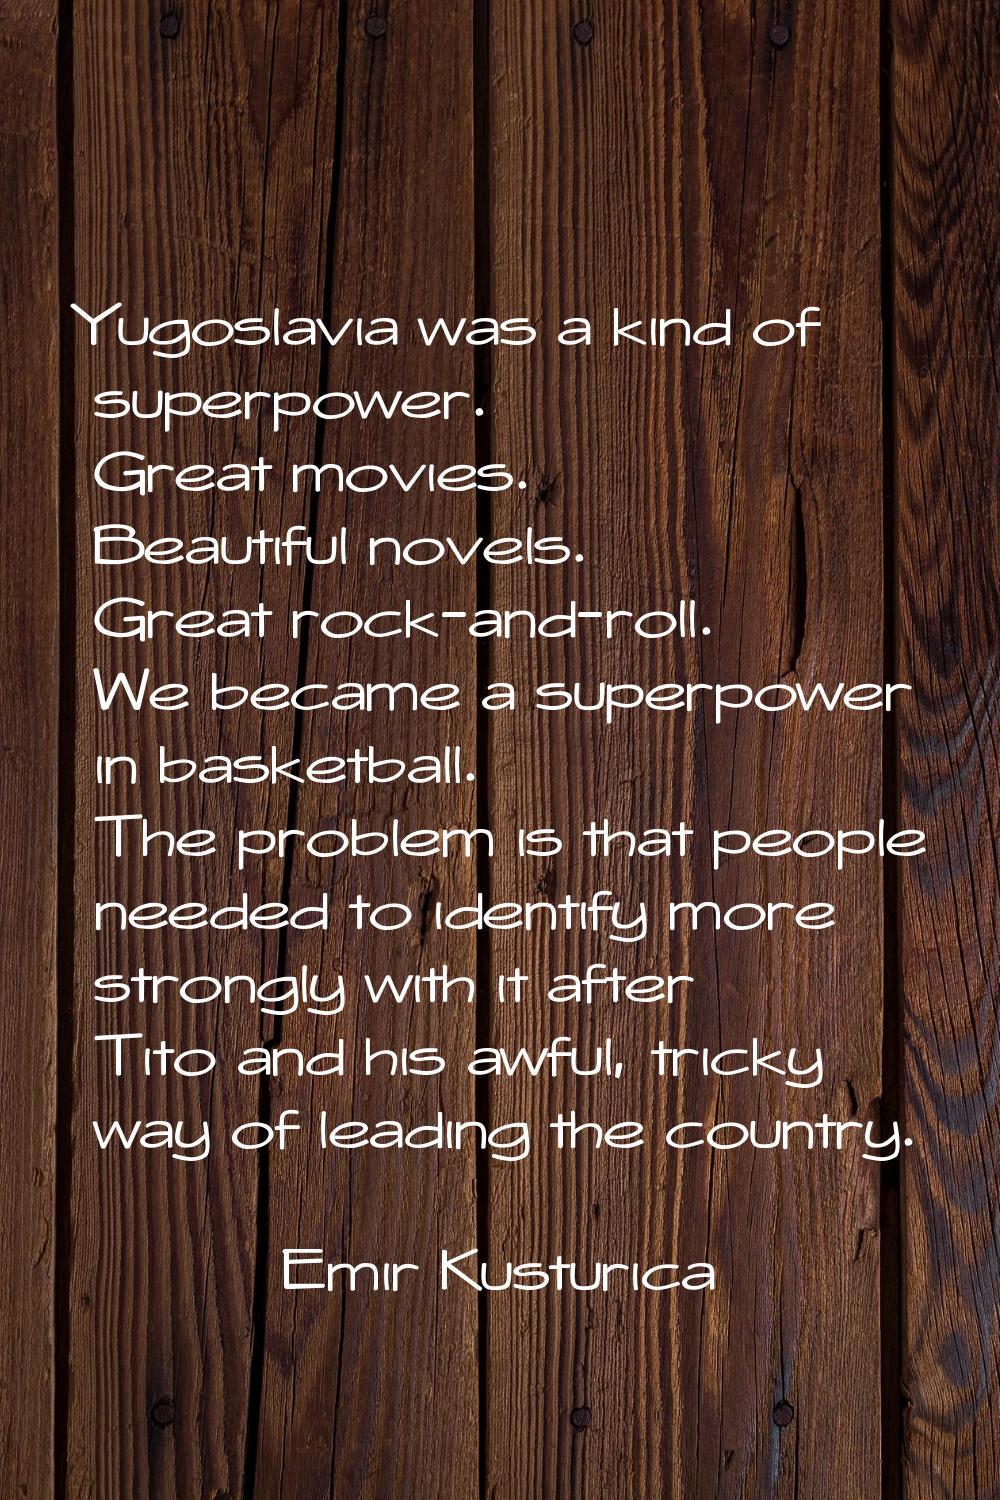 Yugoslavia was a kind of superpower. Great movies. Beautiful novels. Great rock-and-roll. We became